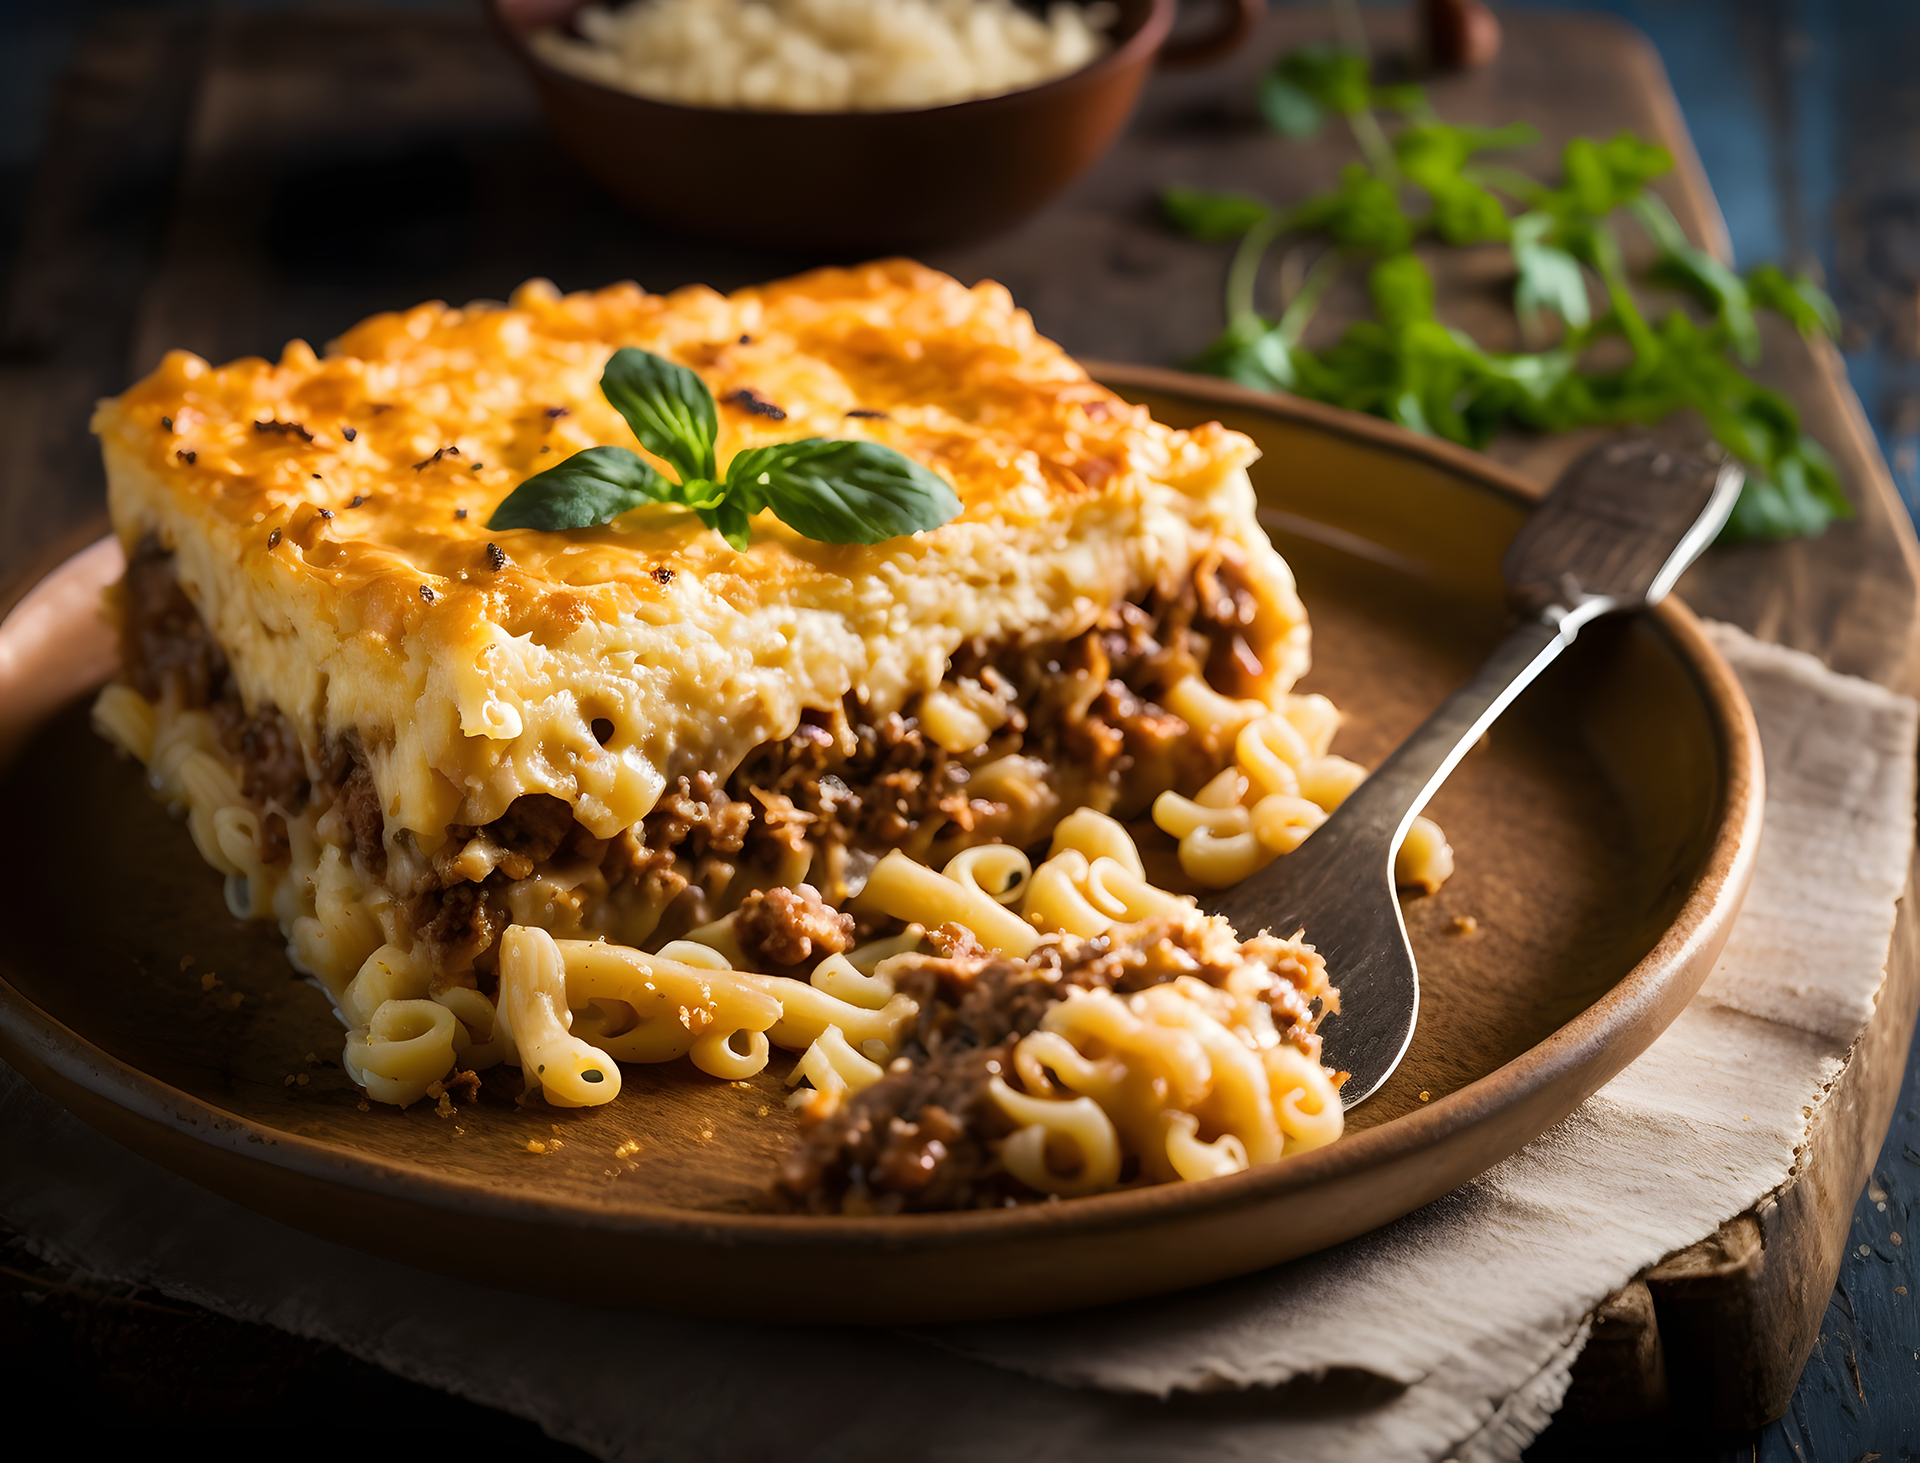 Baked pasta with layers of meat, béchamel sauce, and cheese